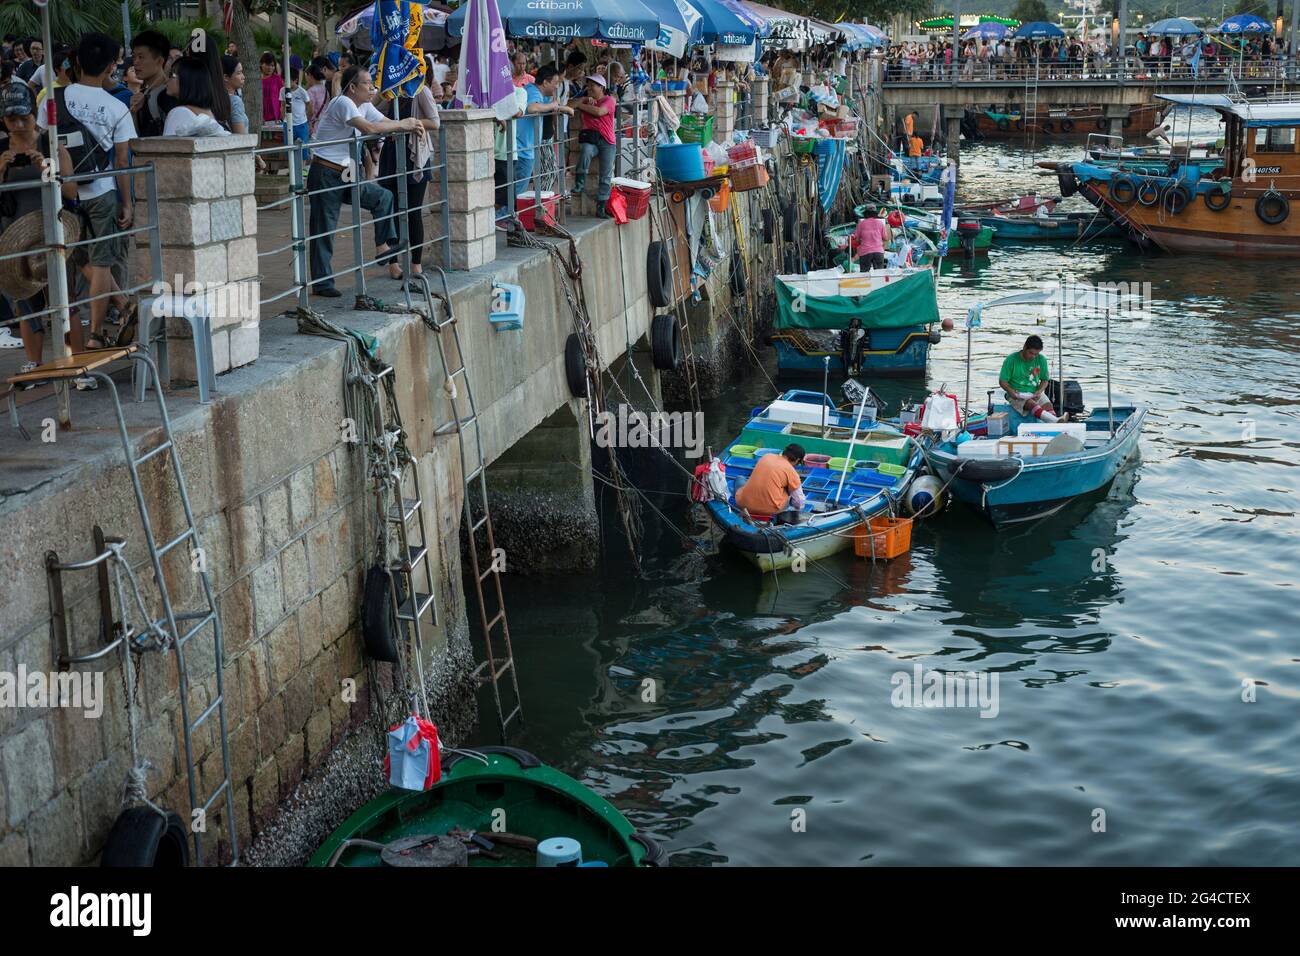 Local fishermen sell their catch to the public directly from their boats, Sai Kung waterfront, New Territories, Hong Kong Stock Photo